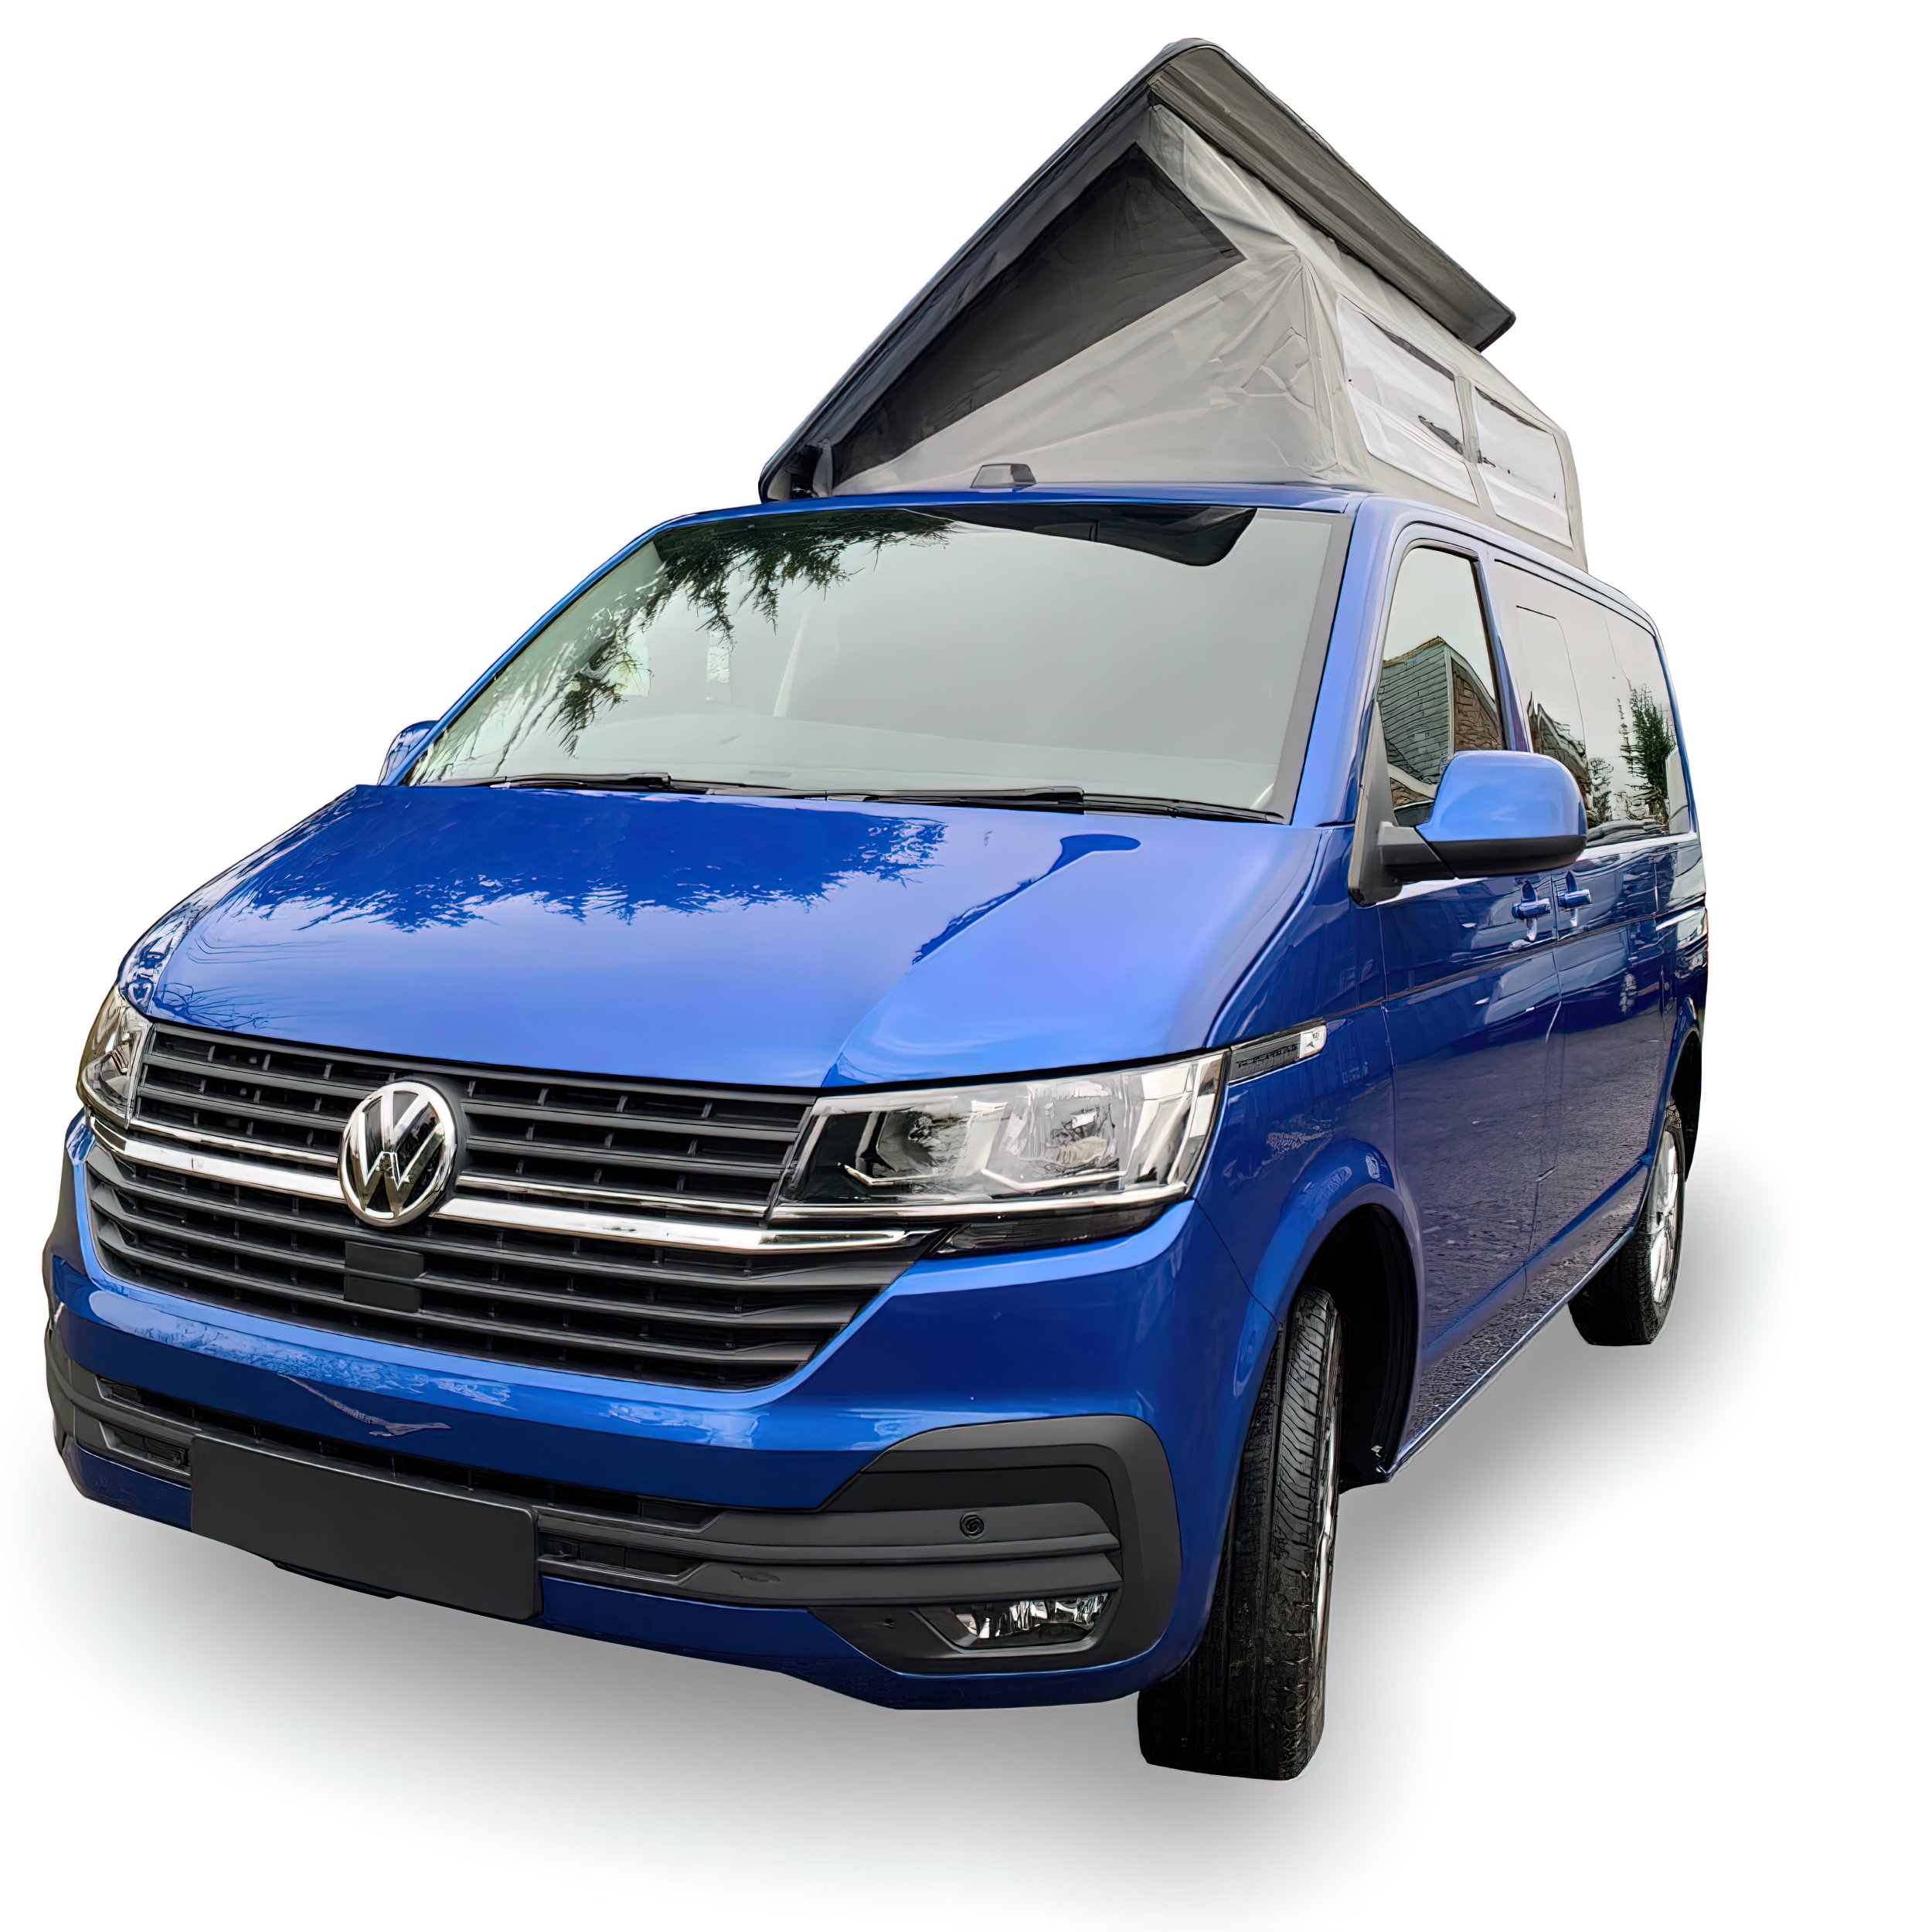  Like the other  campervans  in the Bilbo Designs repertoire, the Space is purpose-built for reliability and ease of use. It uses a VW Transporter van as its base.&nbsp; 